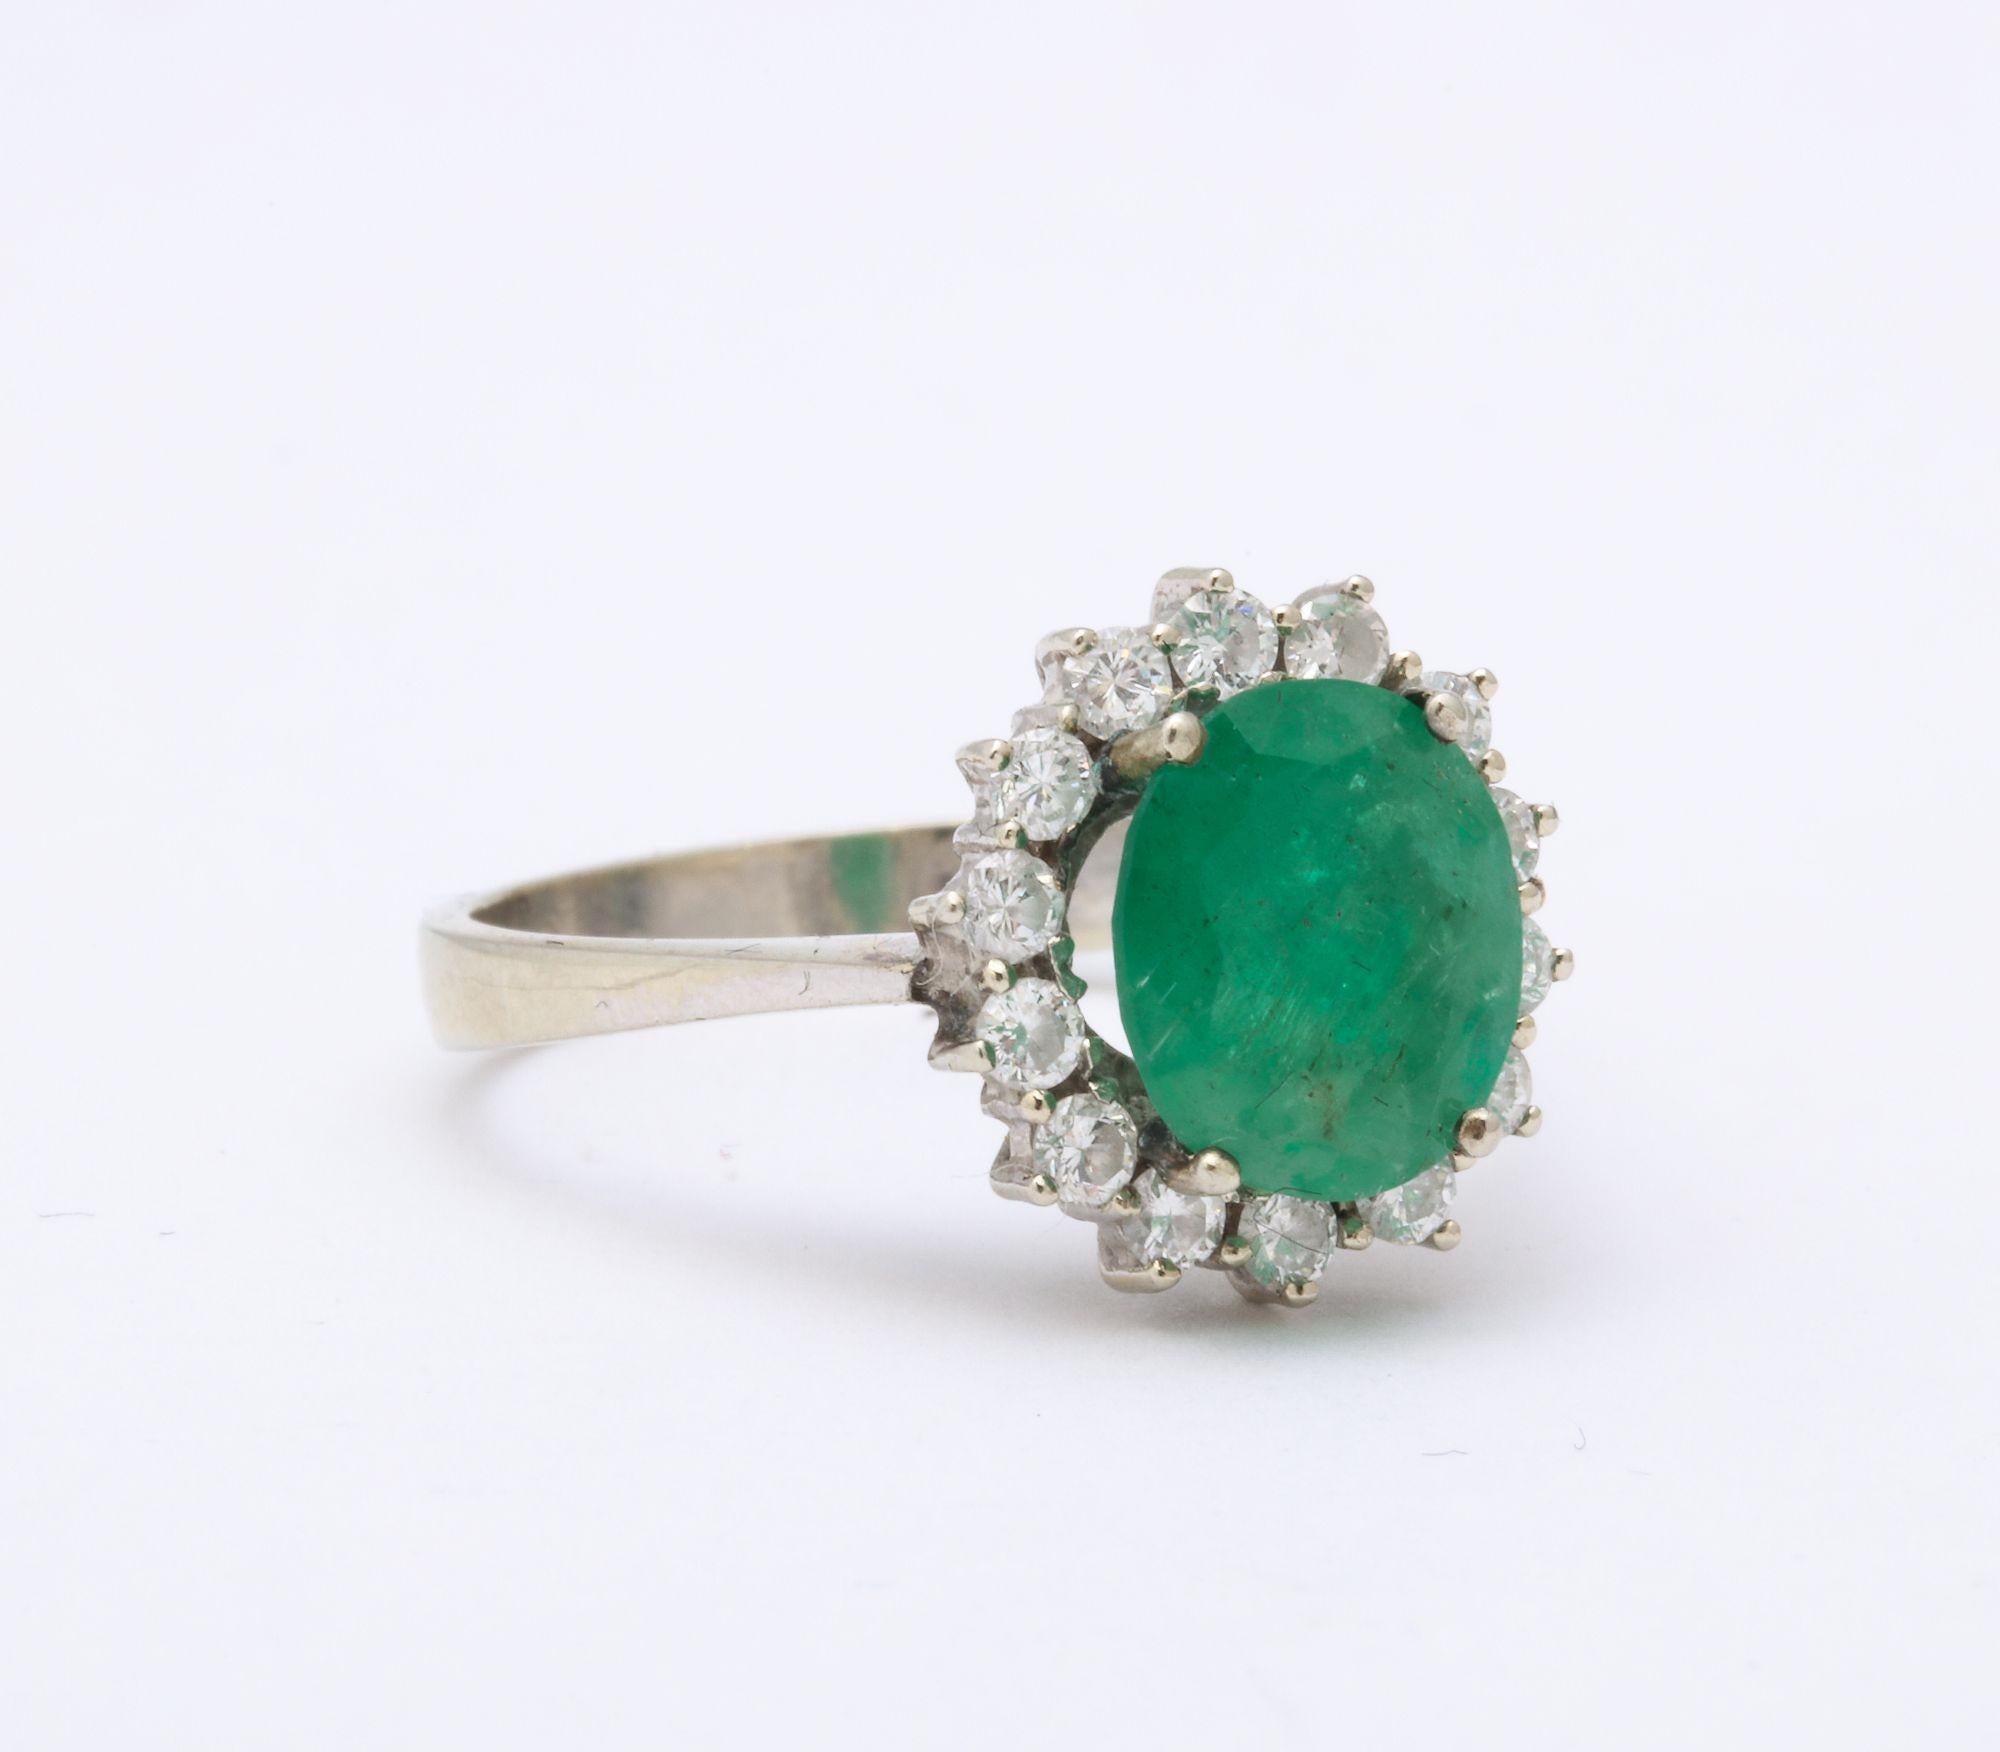 A stunning Diamond and Emerald Gold Ring. An oval mixed cut natural emerald is surrounded with round brilliant cut diamonds.